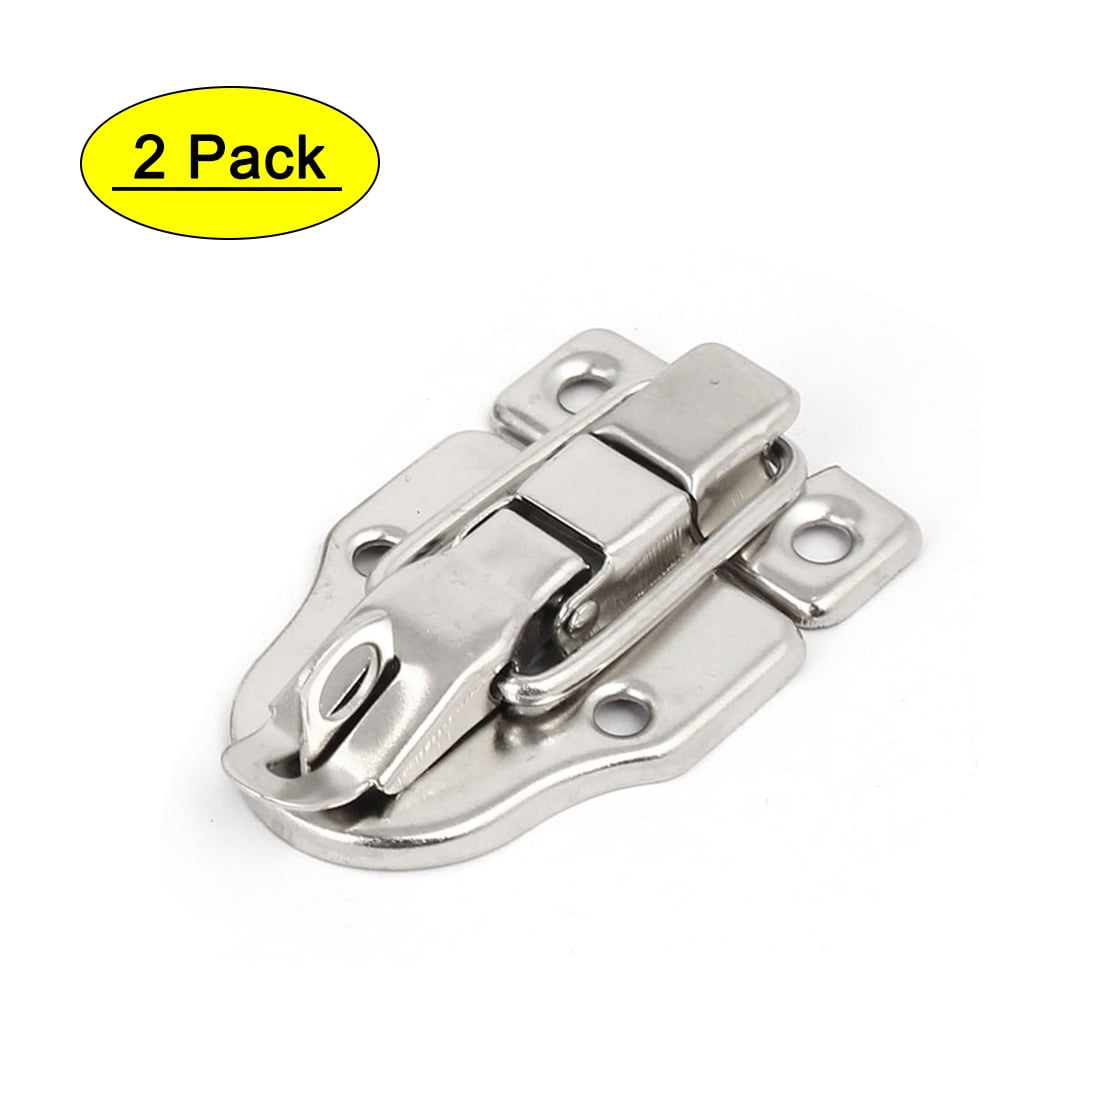 72mm Spring Loaded Toggle Latch Catch Hasp Cabinet Tool Box Case Locking Silver